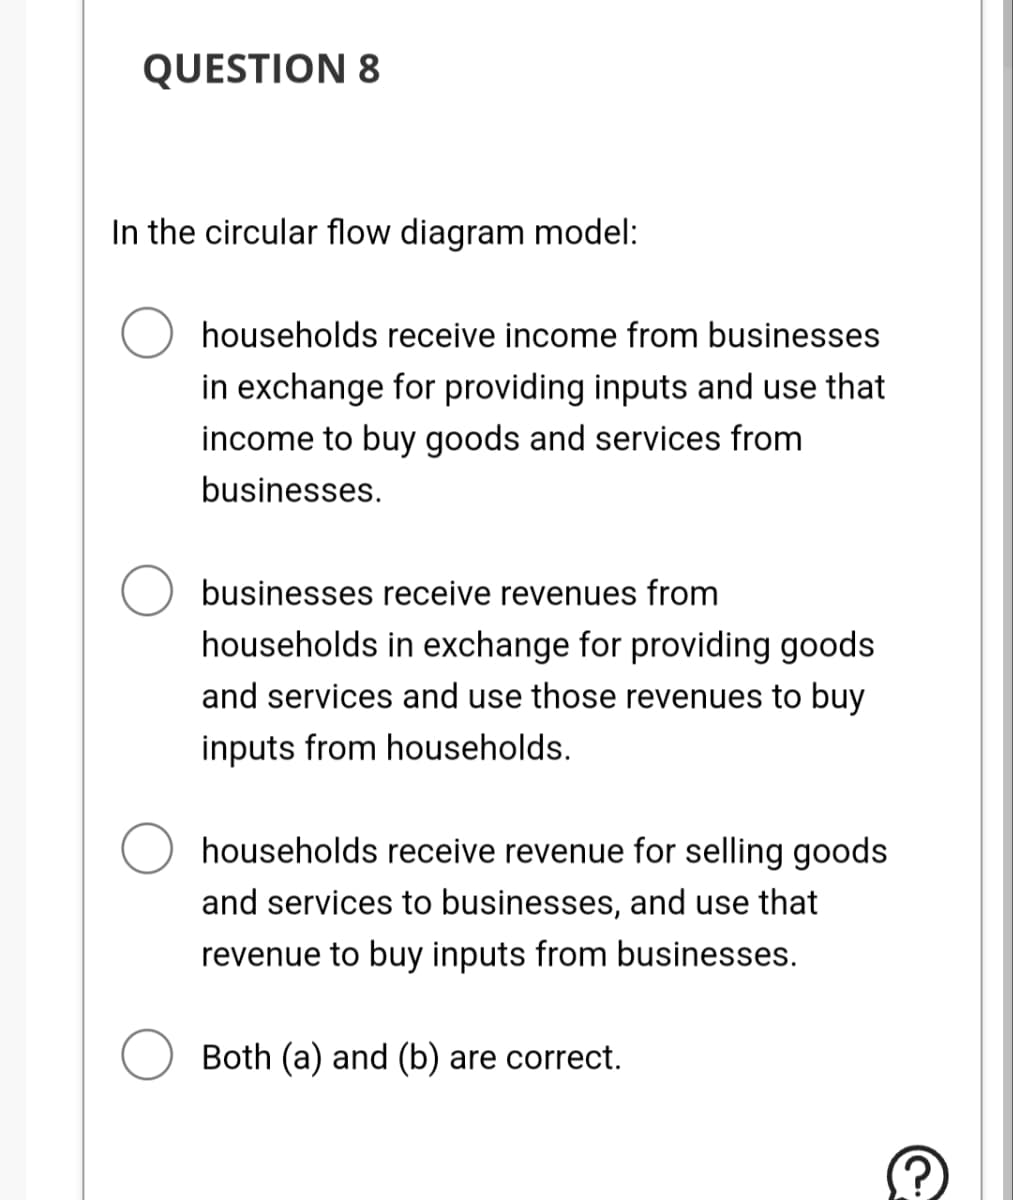 QUESTION 8
In the circular flow diagram model:
households receive income from businesses
in exchange for providing inputs and use that
income to buy goods and services from
businesses.
businesses receive revenues from
households in exchange for providing goods
and services and use those revenues to buy
inputs from households.
households receive revenue for selling goods
and services to businesses, and use that
revenue to buy inputs from businesses.
Both (a) and (b) are correct.